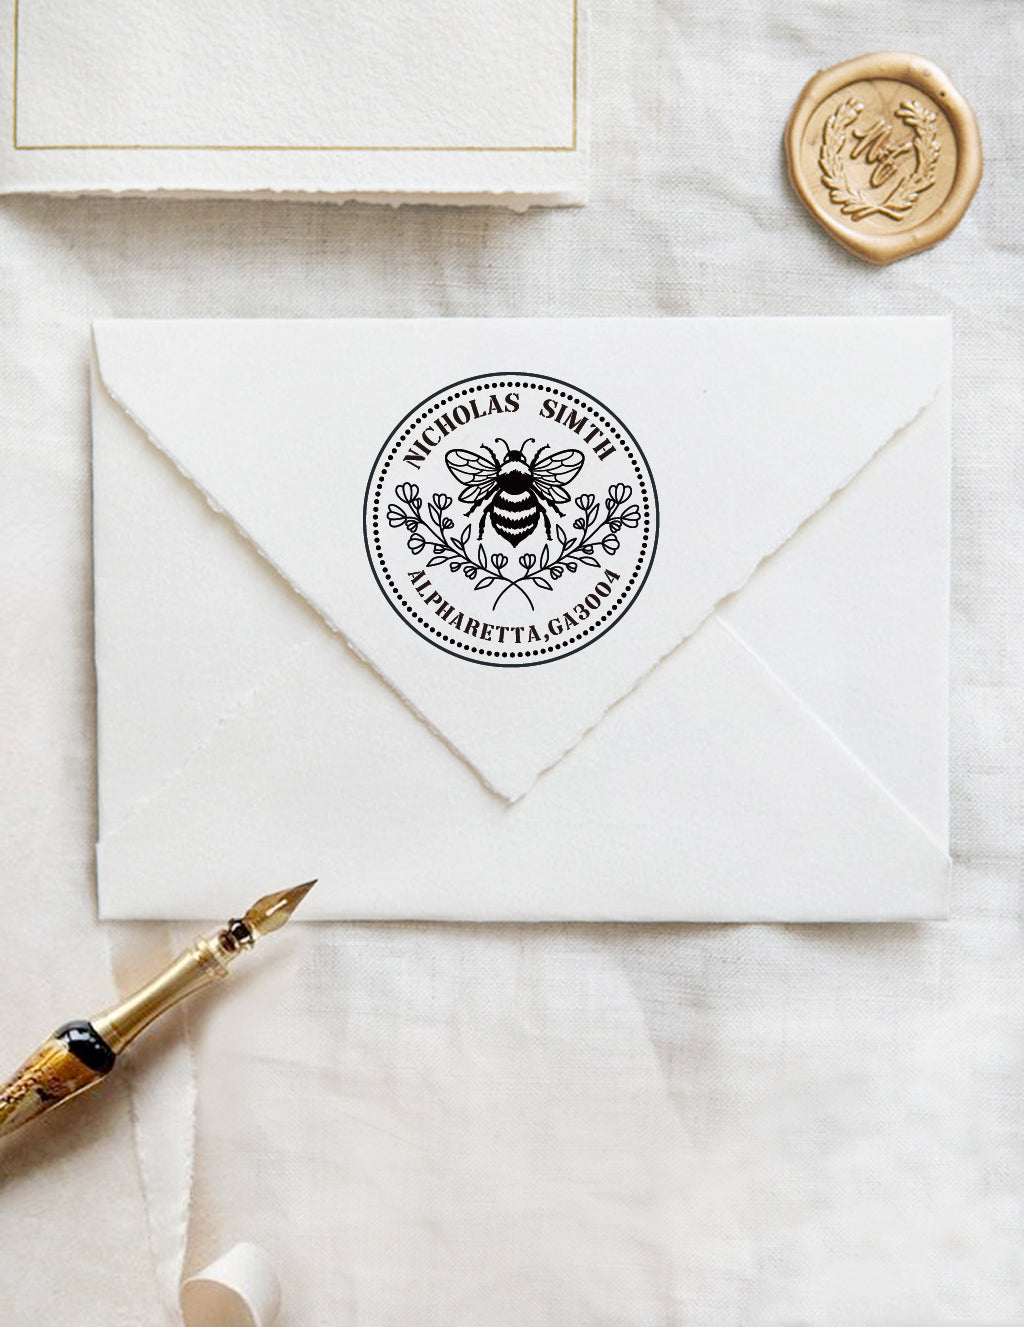 A personalized self inking address stamp, customized with your name and address, bee and flower, stamped on the white envelope, beside it, a wax seal is waiting for sealing the mail.